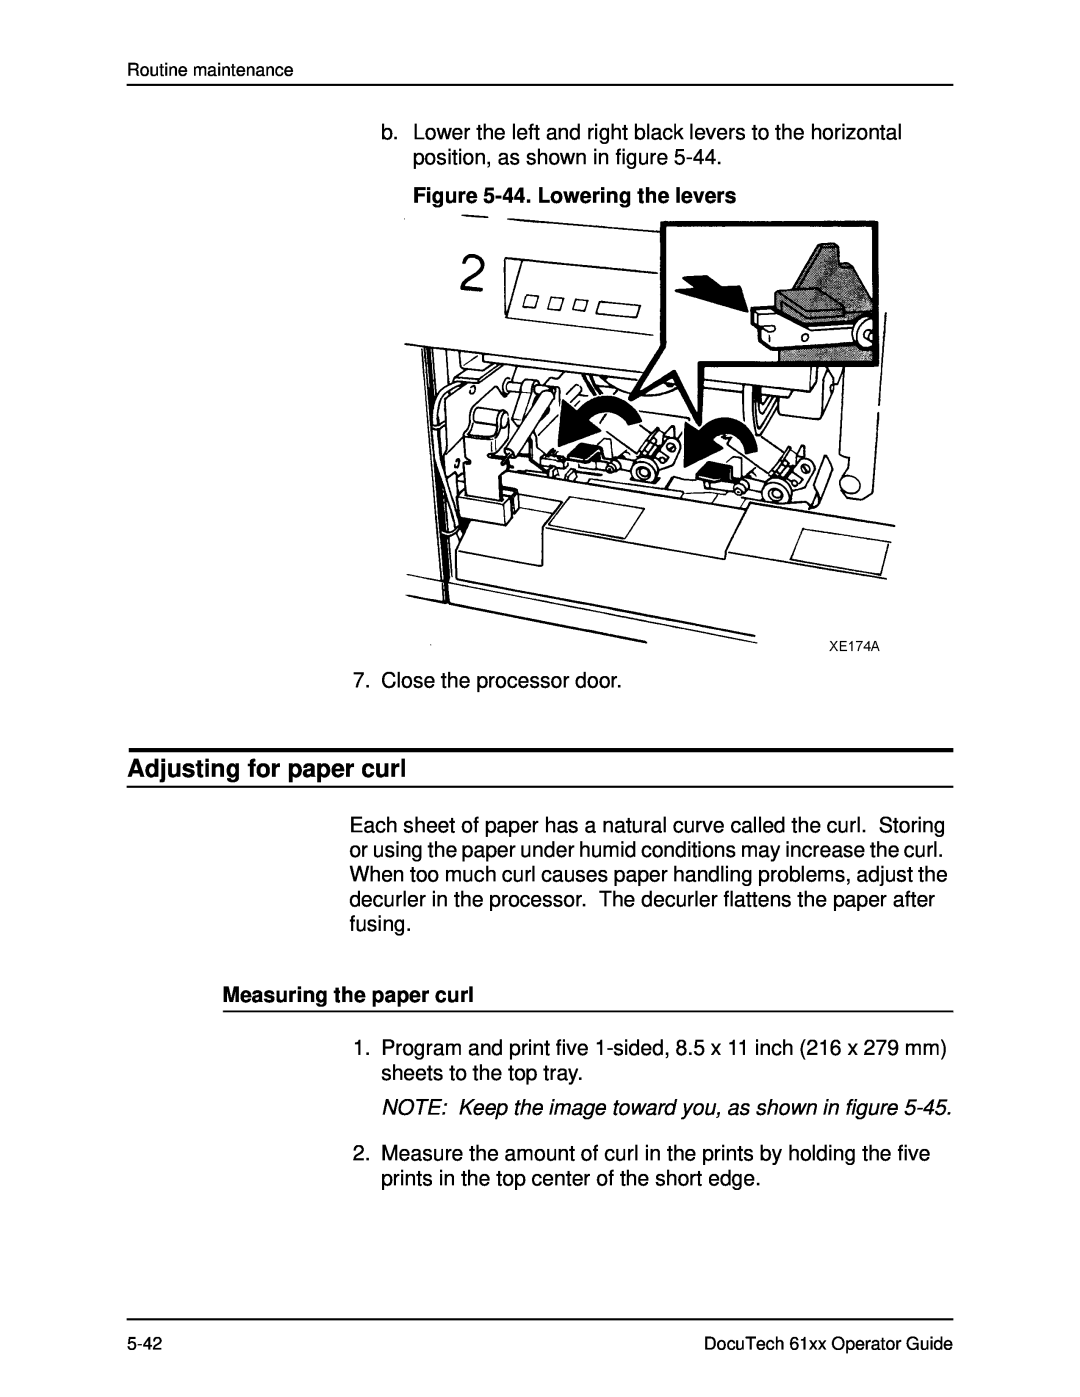 Xerox 61xx manual Adjusting for paper curl, 44. Lowering the levers, Measuring the paper curl 